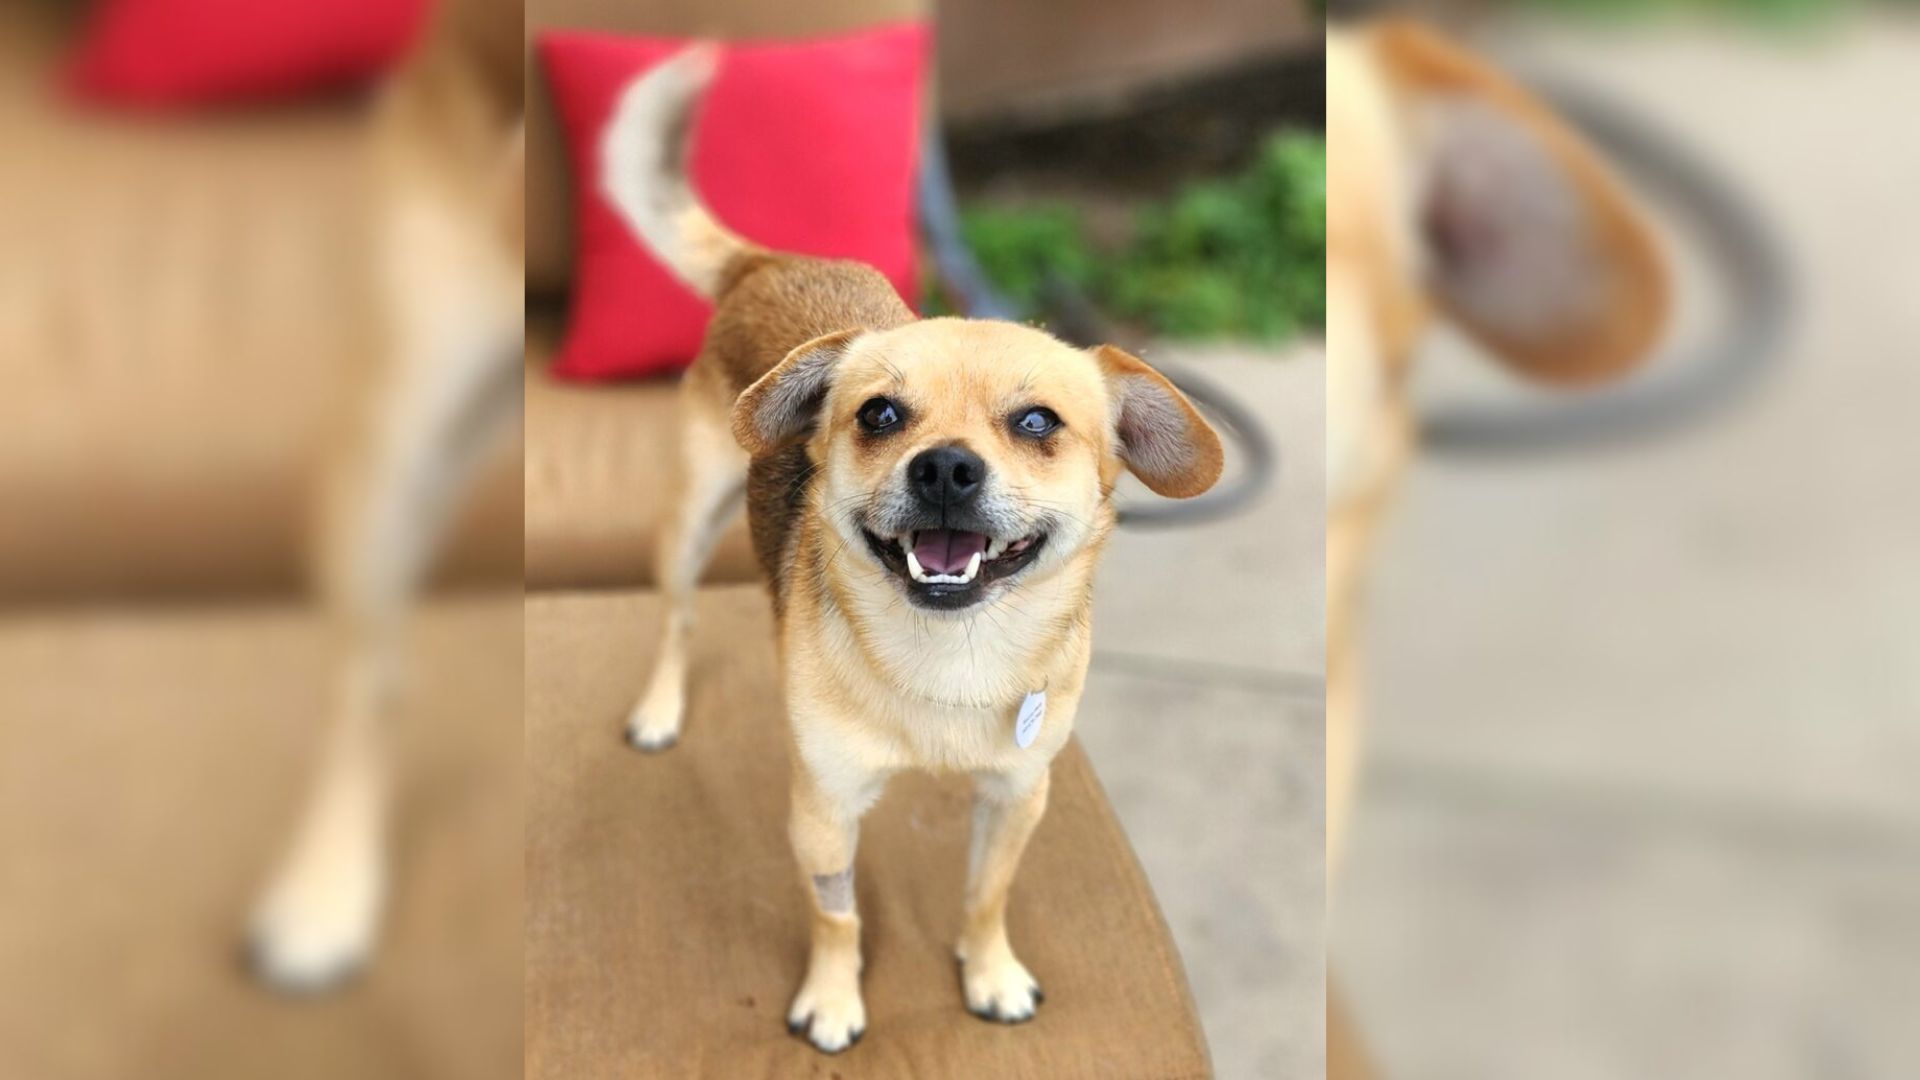 This Tiny Dog Was Surrendered To A Shelter After His Owner Got Evicted From The Home